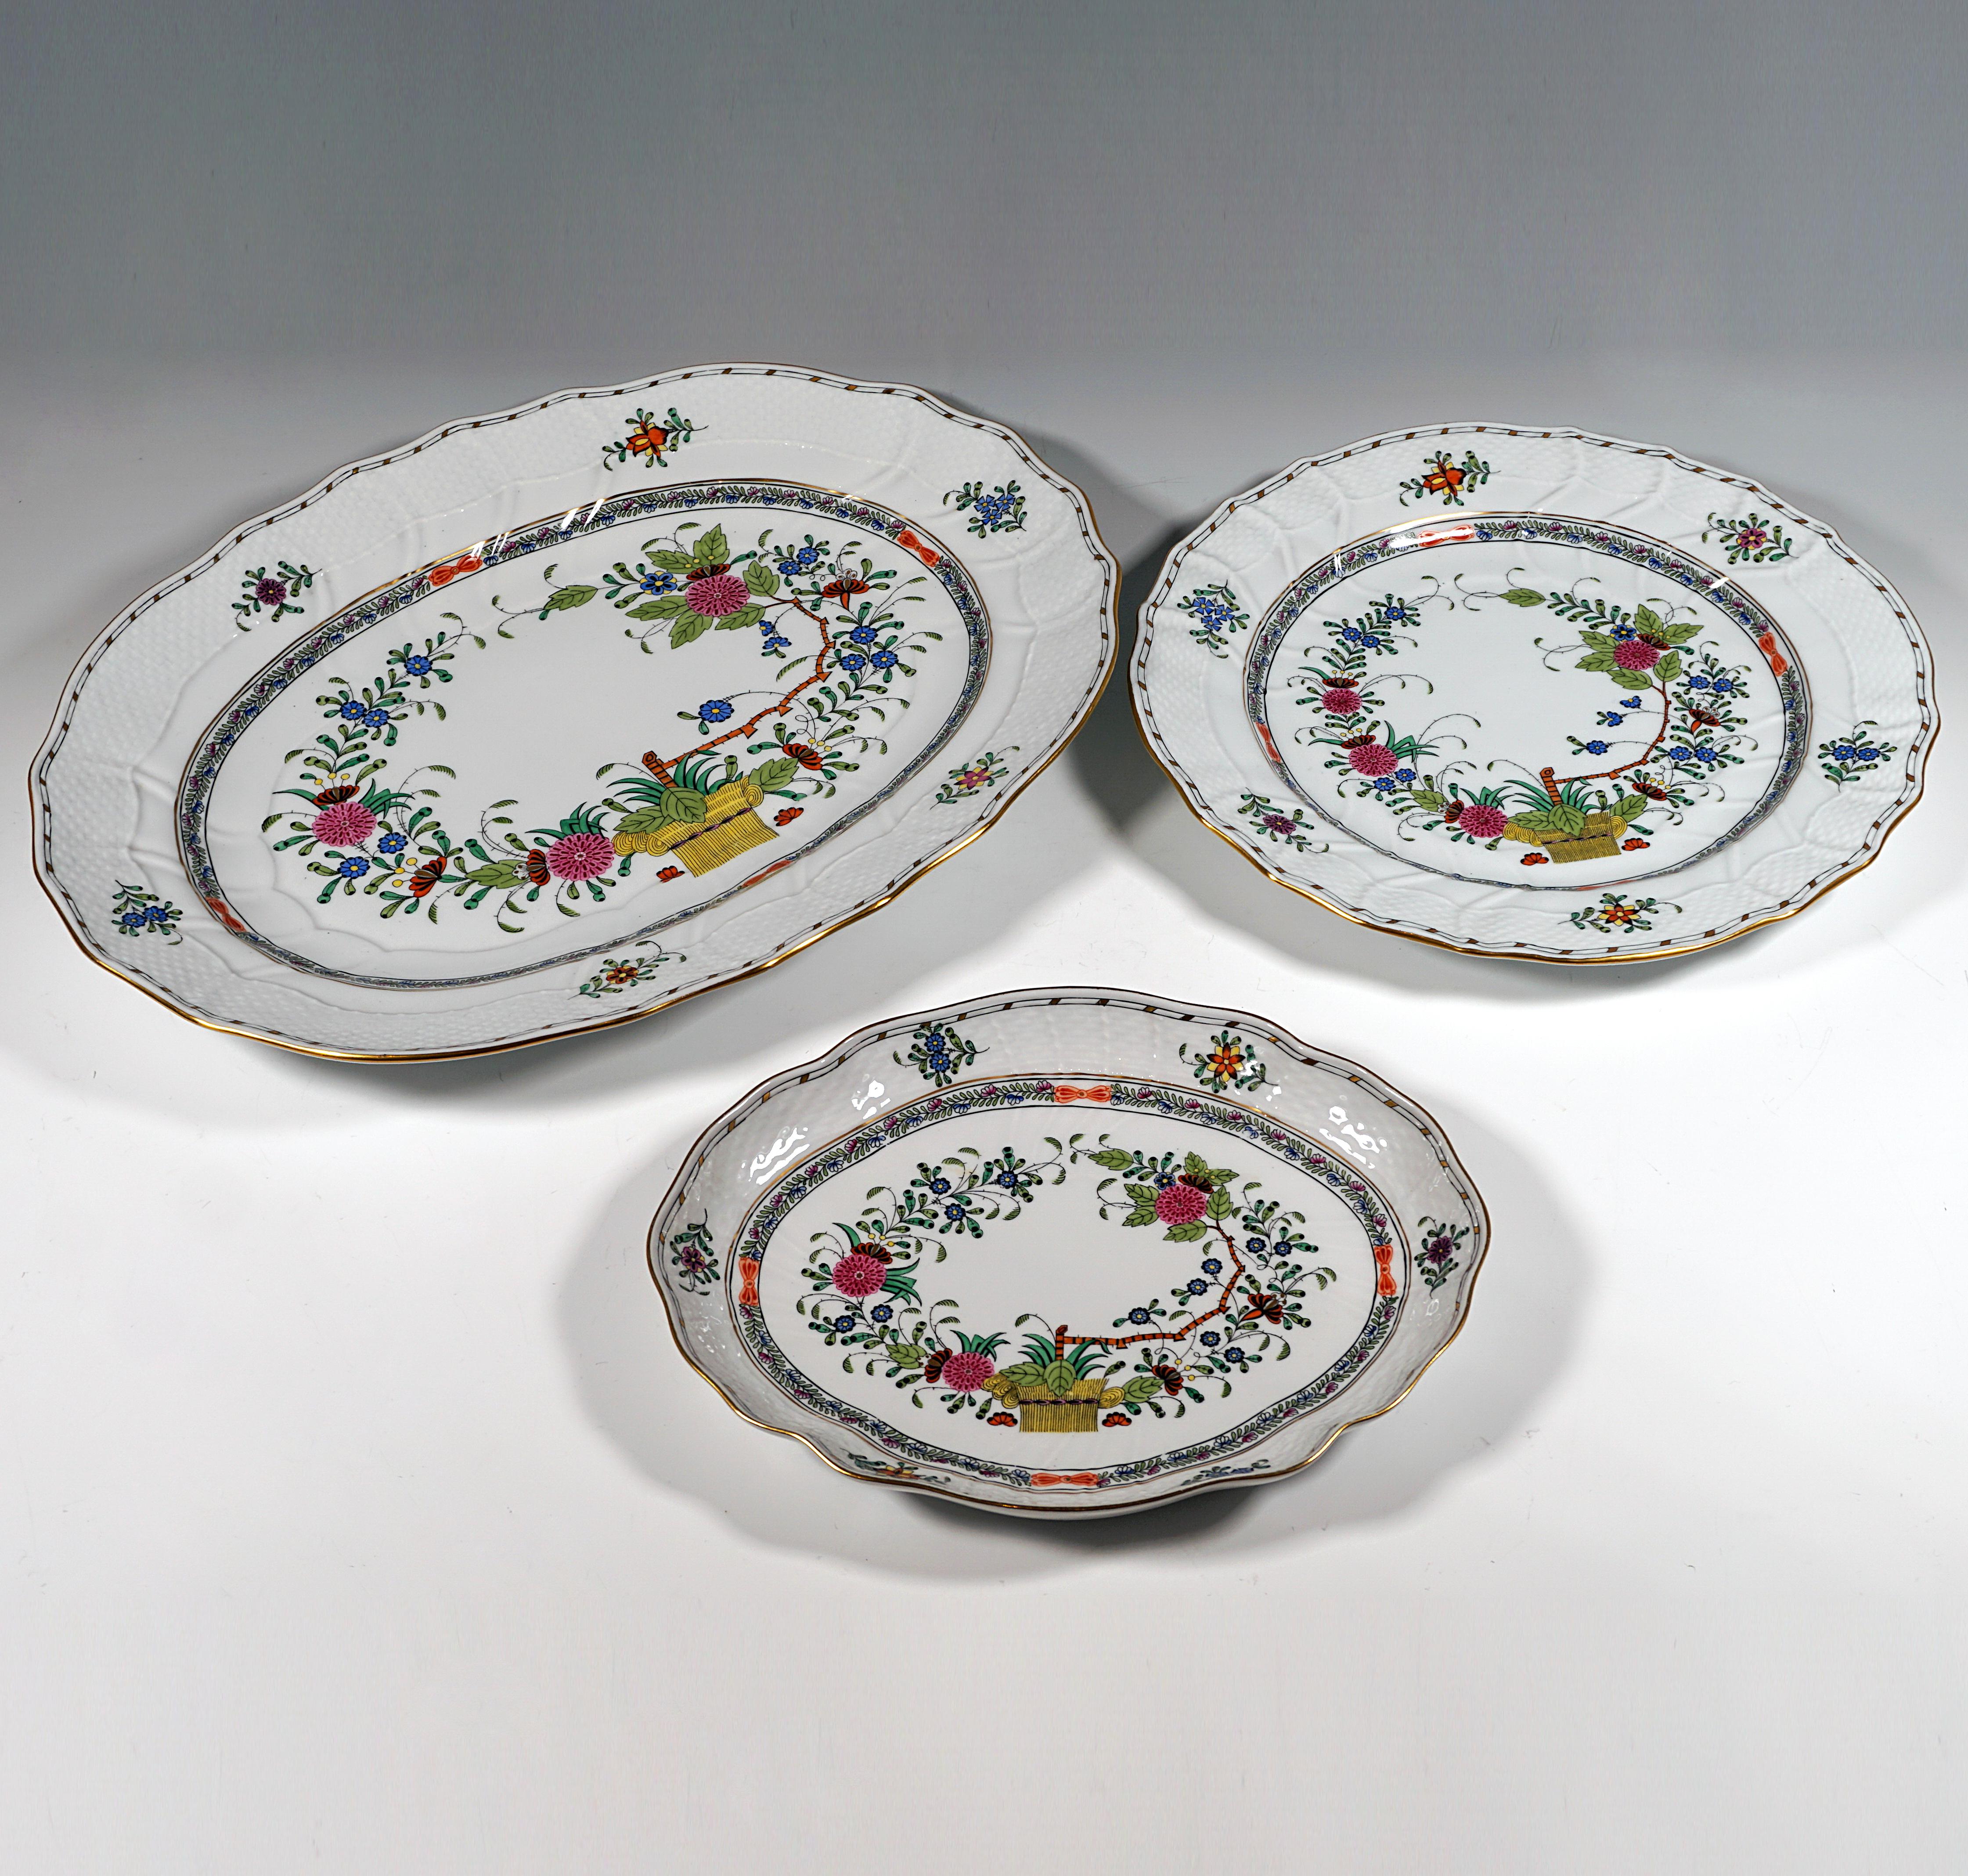 Other Fleurs Des Indes Dinner Set For 6 Persons, Herend Hungary, 20th Century